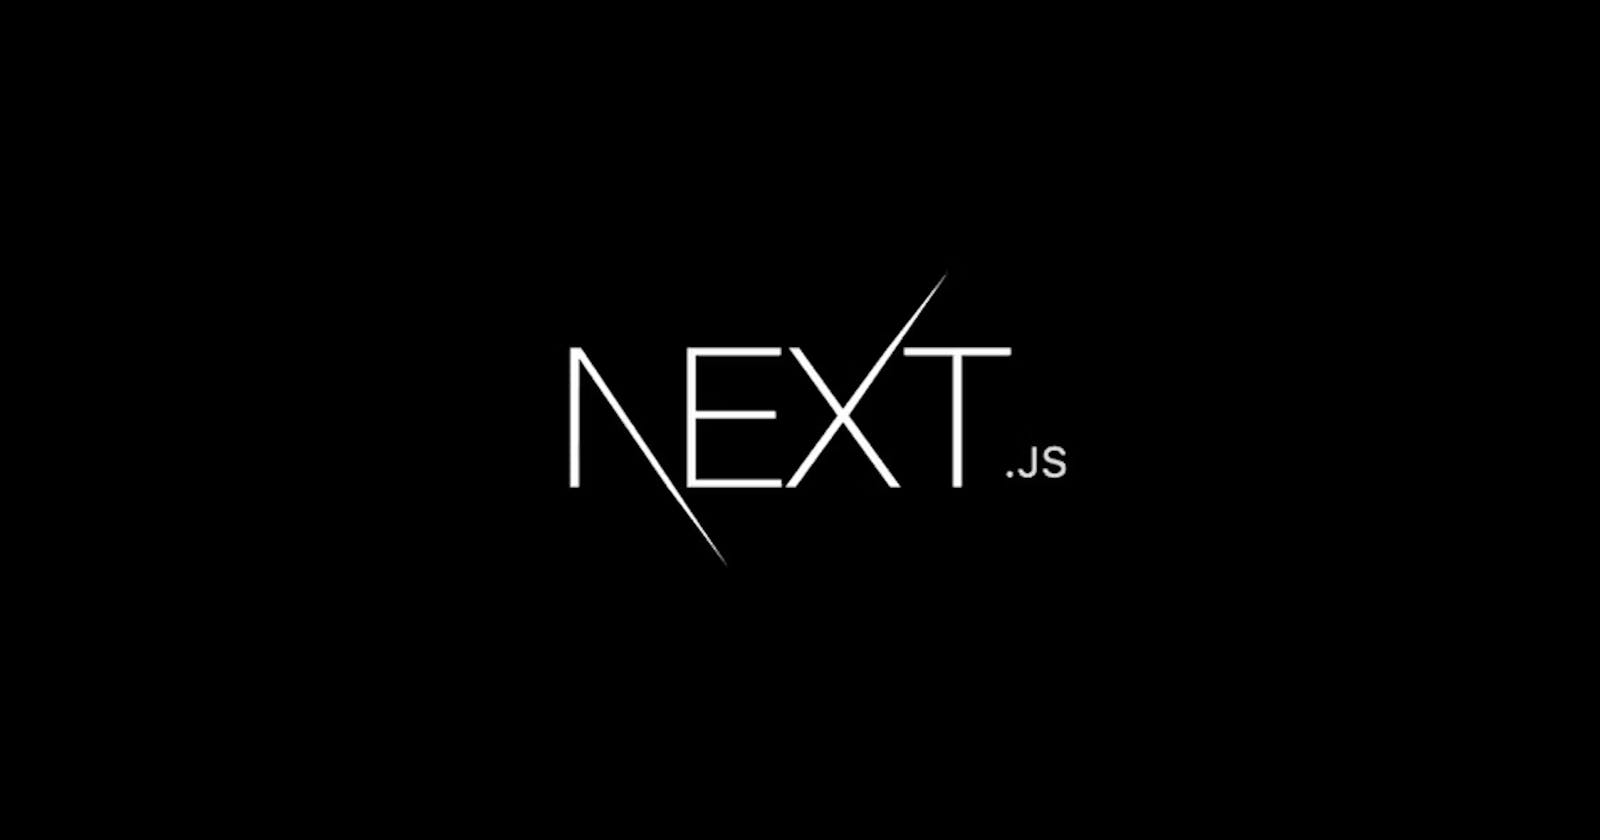 Next.js: The Ultimate Guide